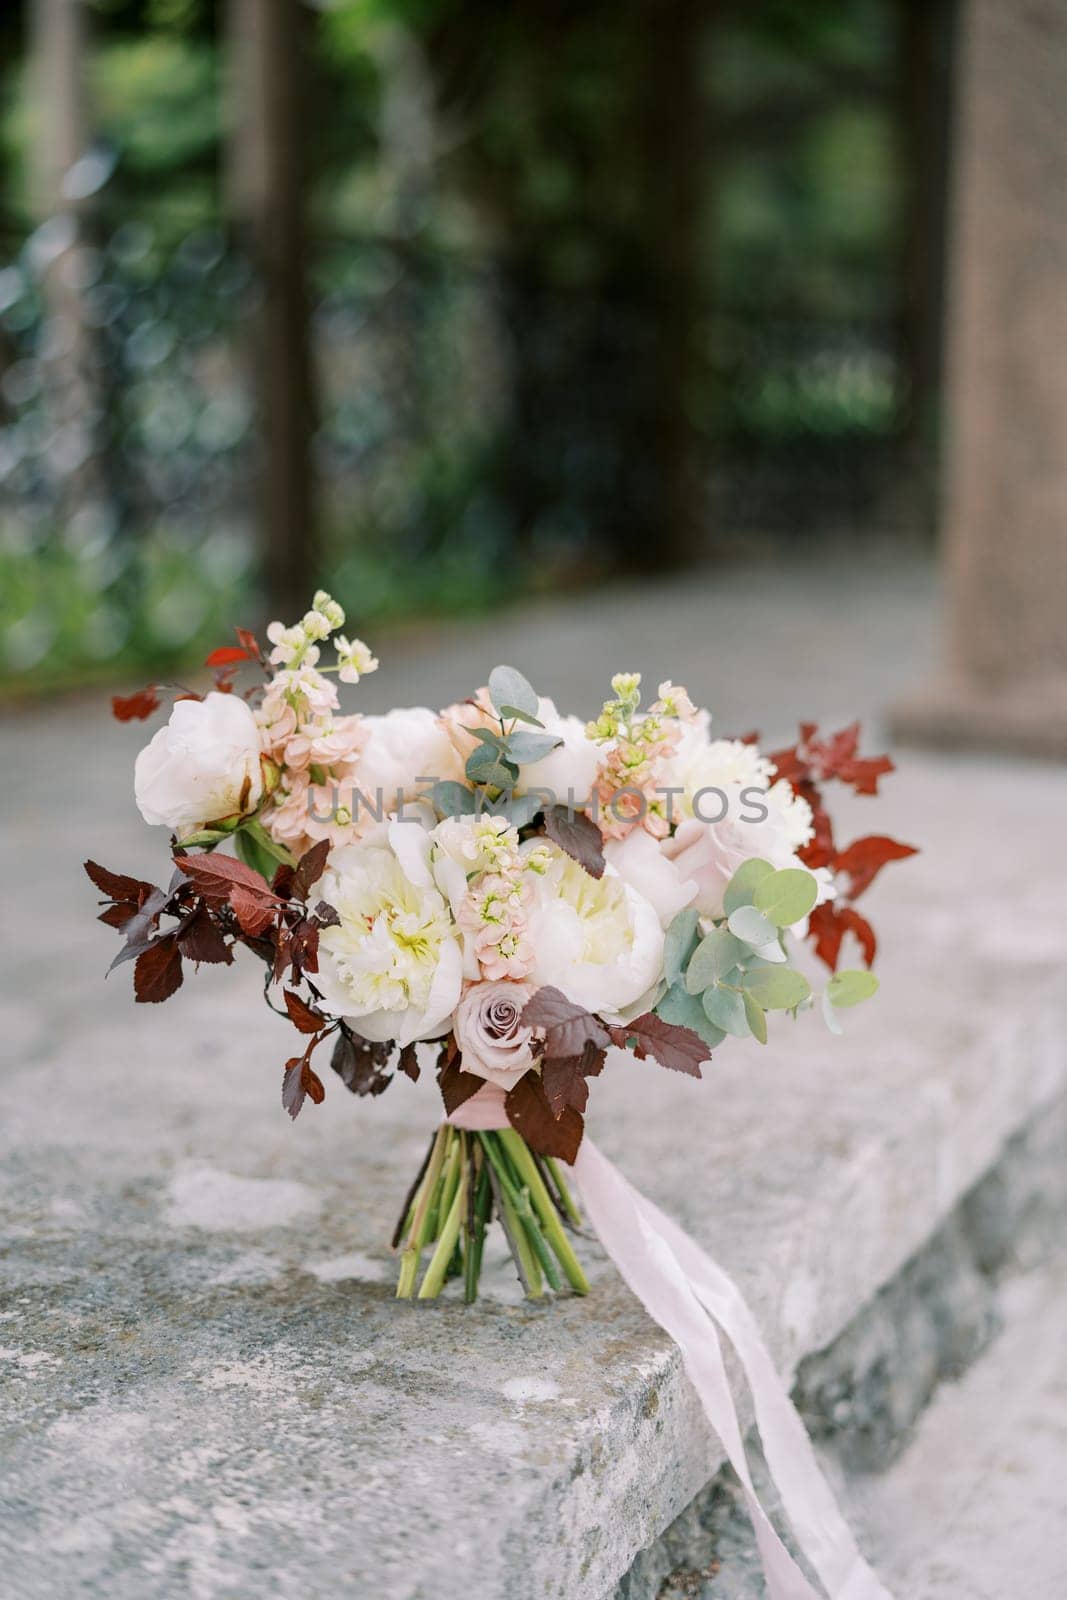 Wedding bouquet stands on a stone slab in the garden by Nadtochiy